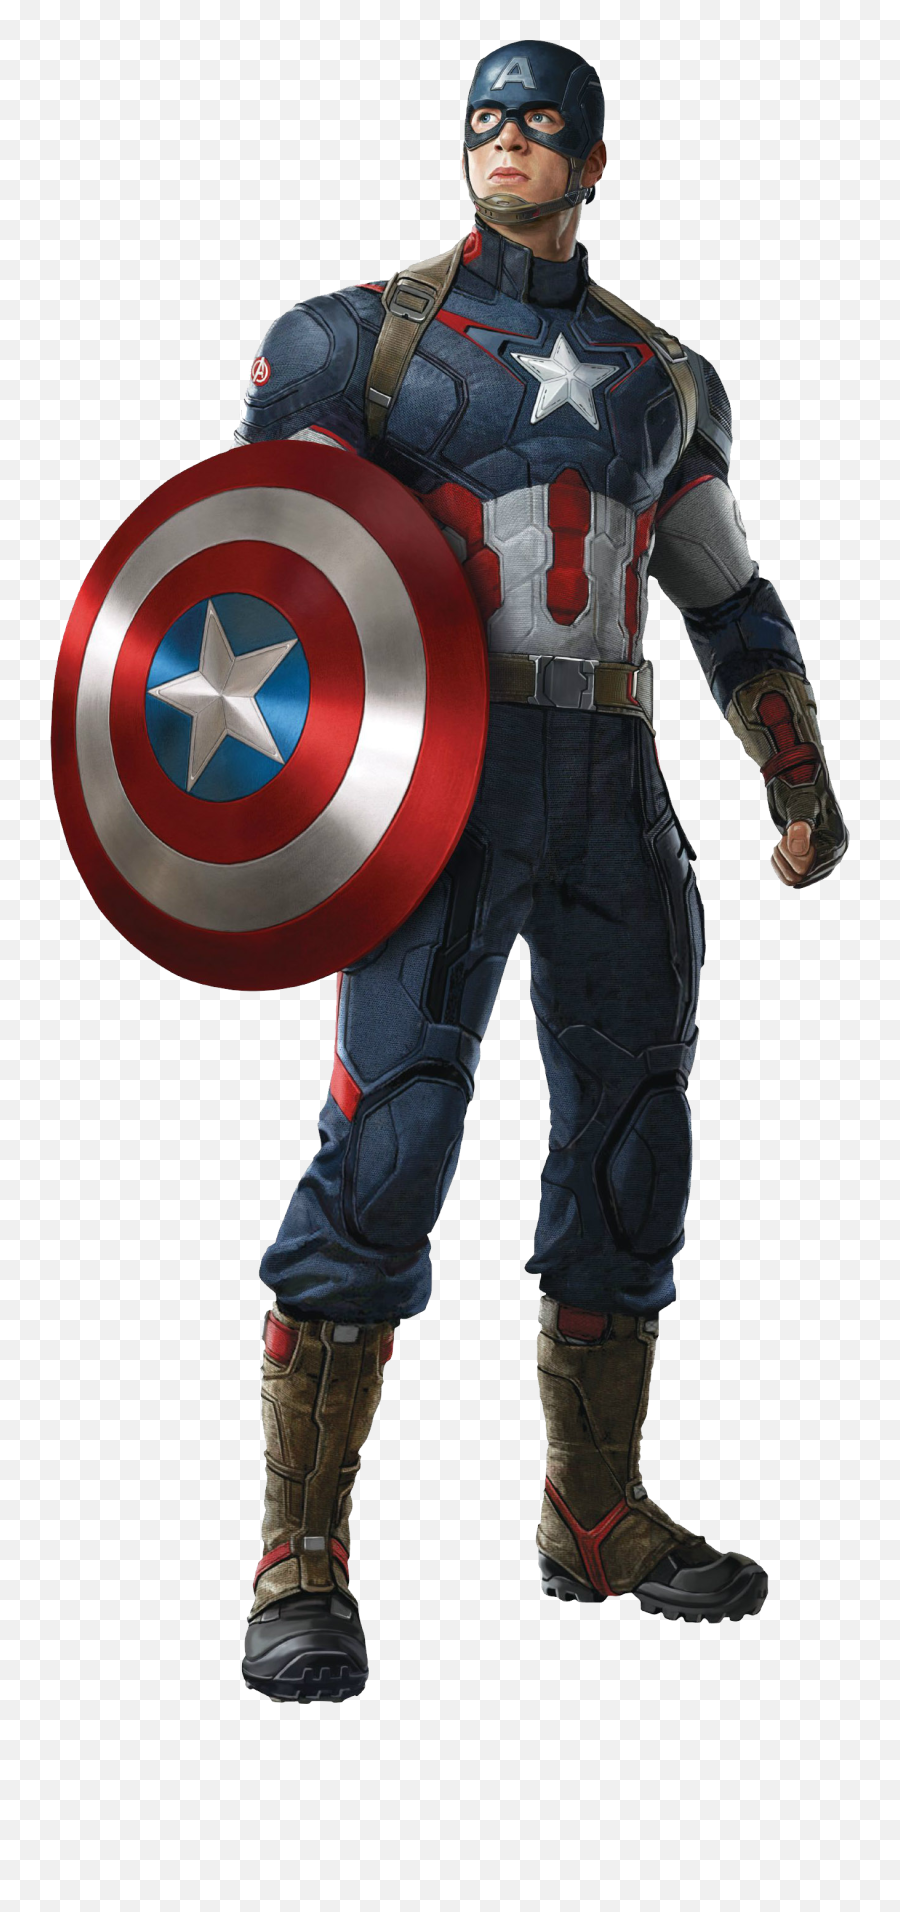 Captain America Png Image For Free Download - Avengers 2 Captain America,Captain America Transparent Background